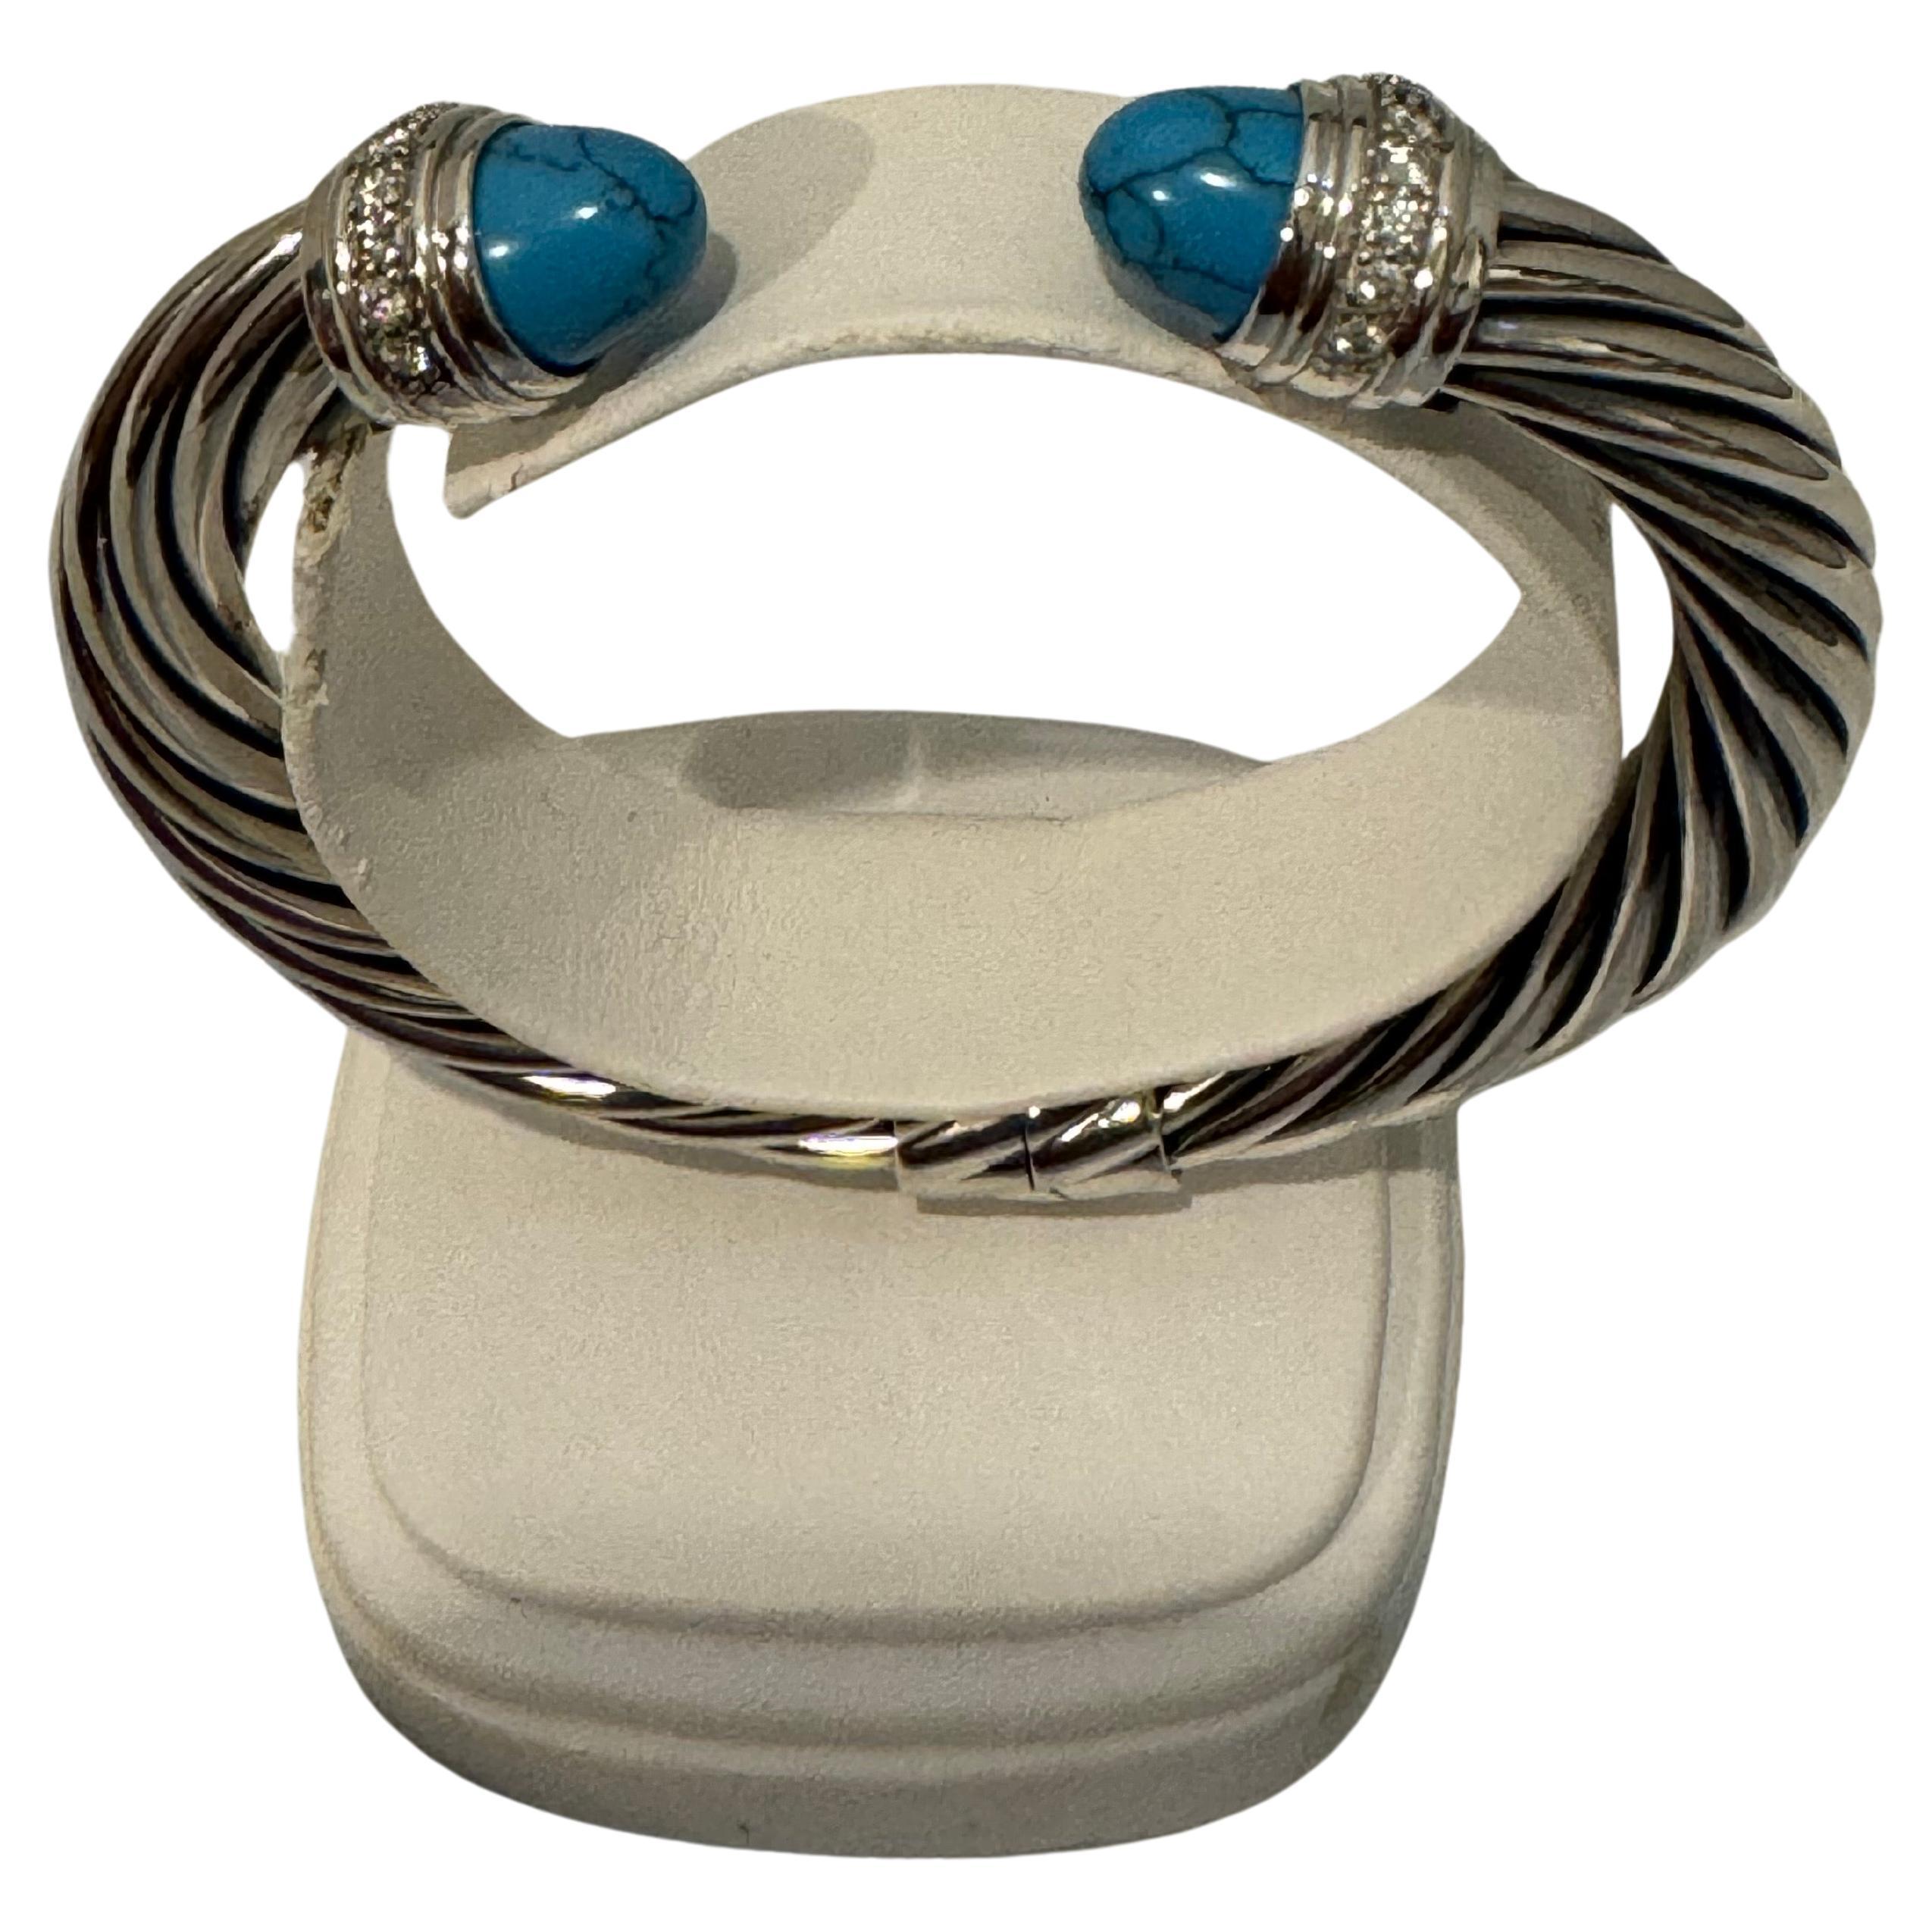 Cable Classics Bracelet in Sterling Silver with Turquoise and Pavé Diamonds 10MM